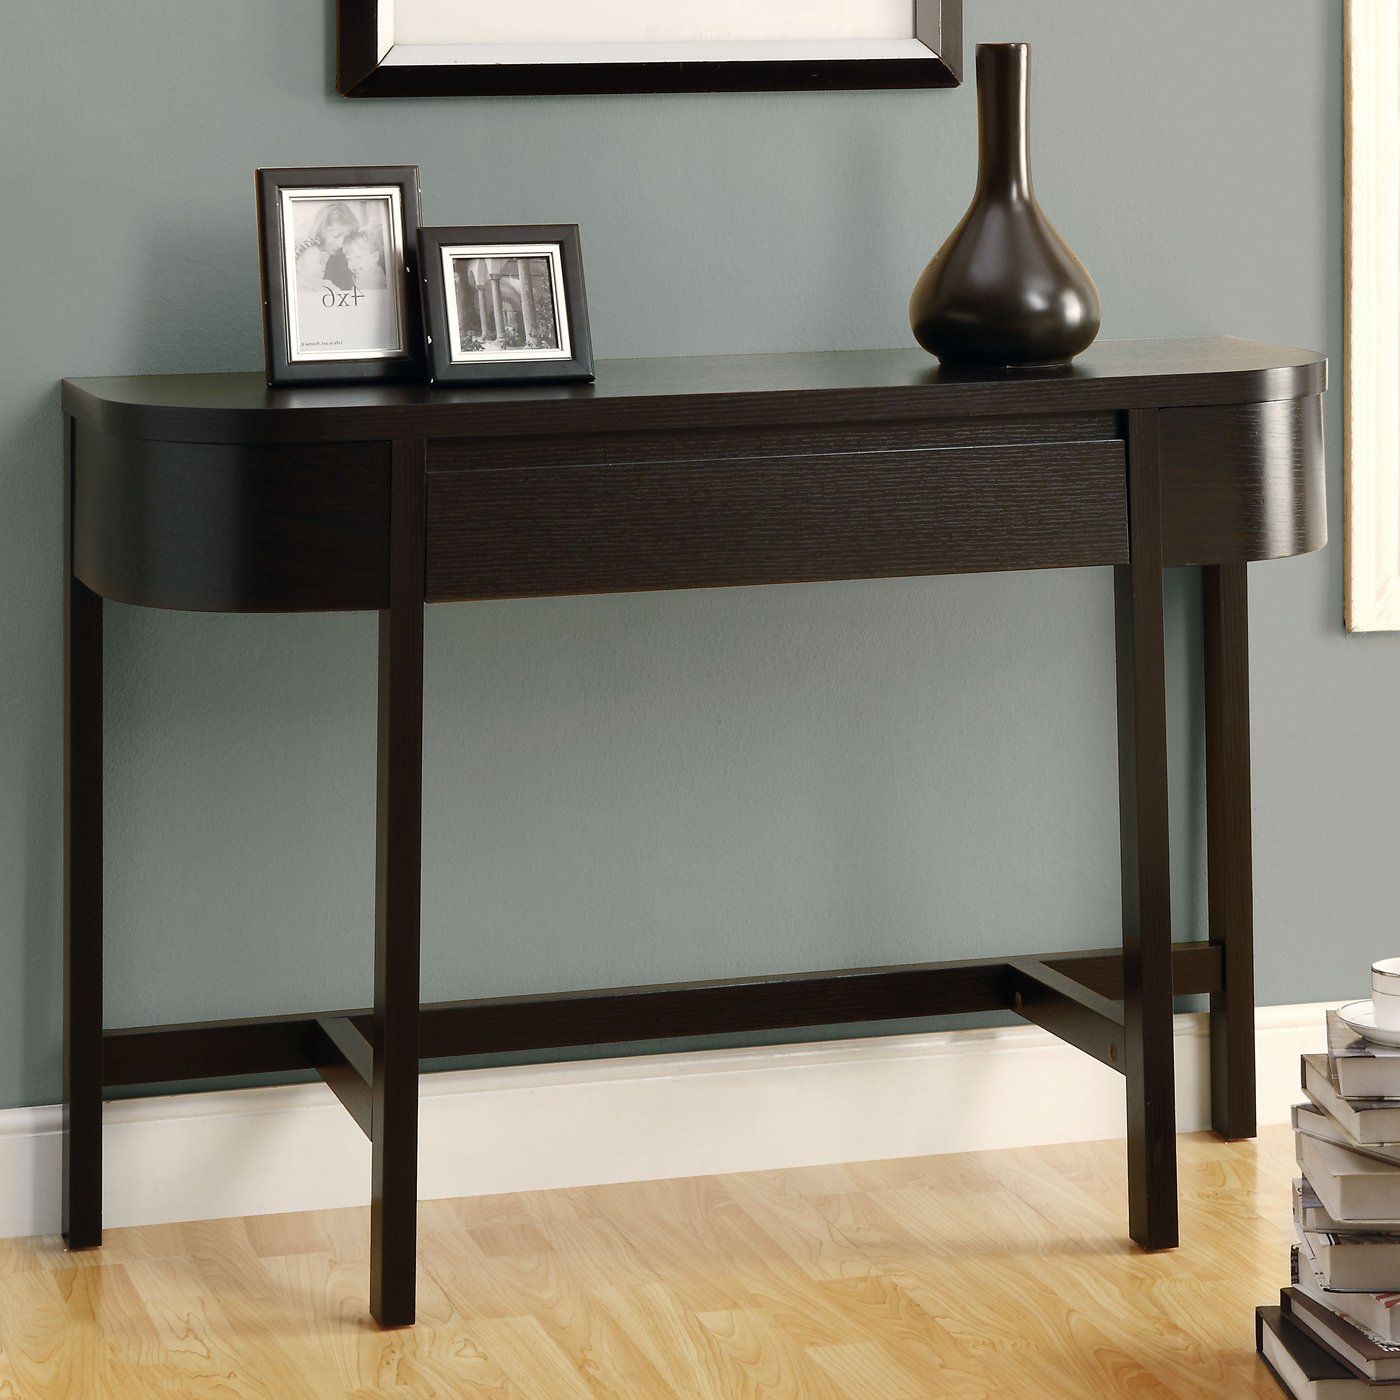 Slim Console Tables That Will Add The Sophistication Of Intended For 2 Piece Round Console Tables Set (View 16 of 20)